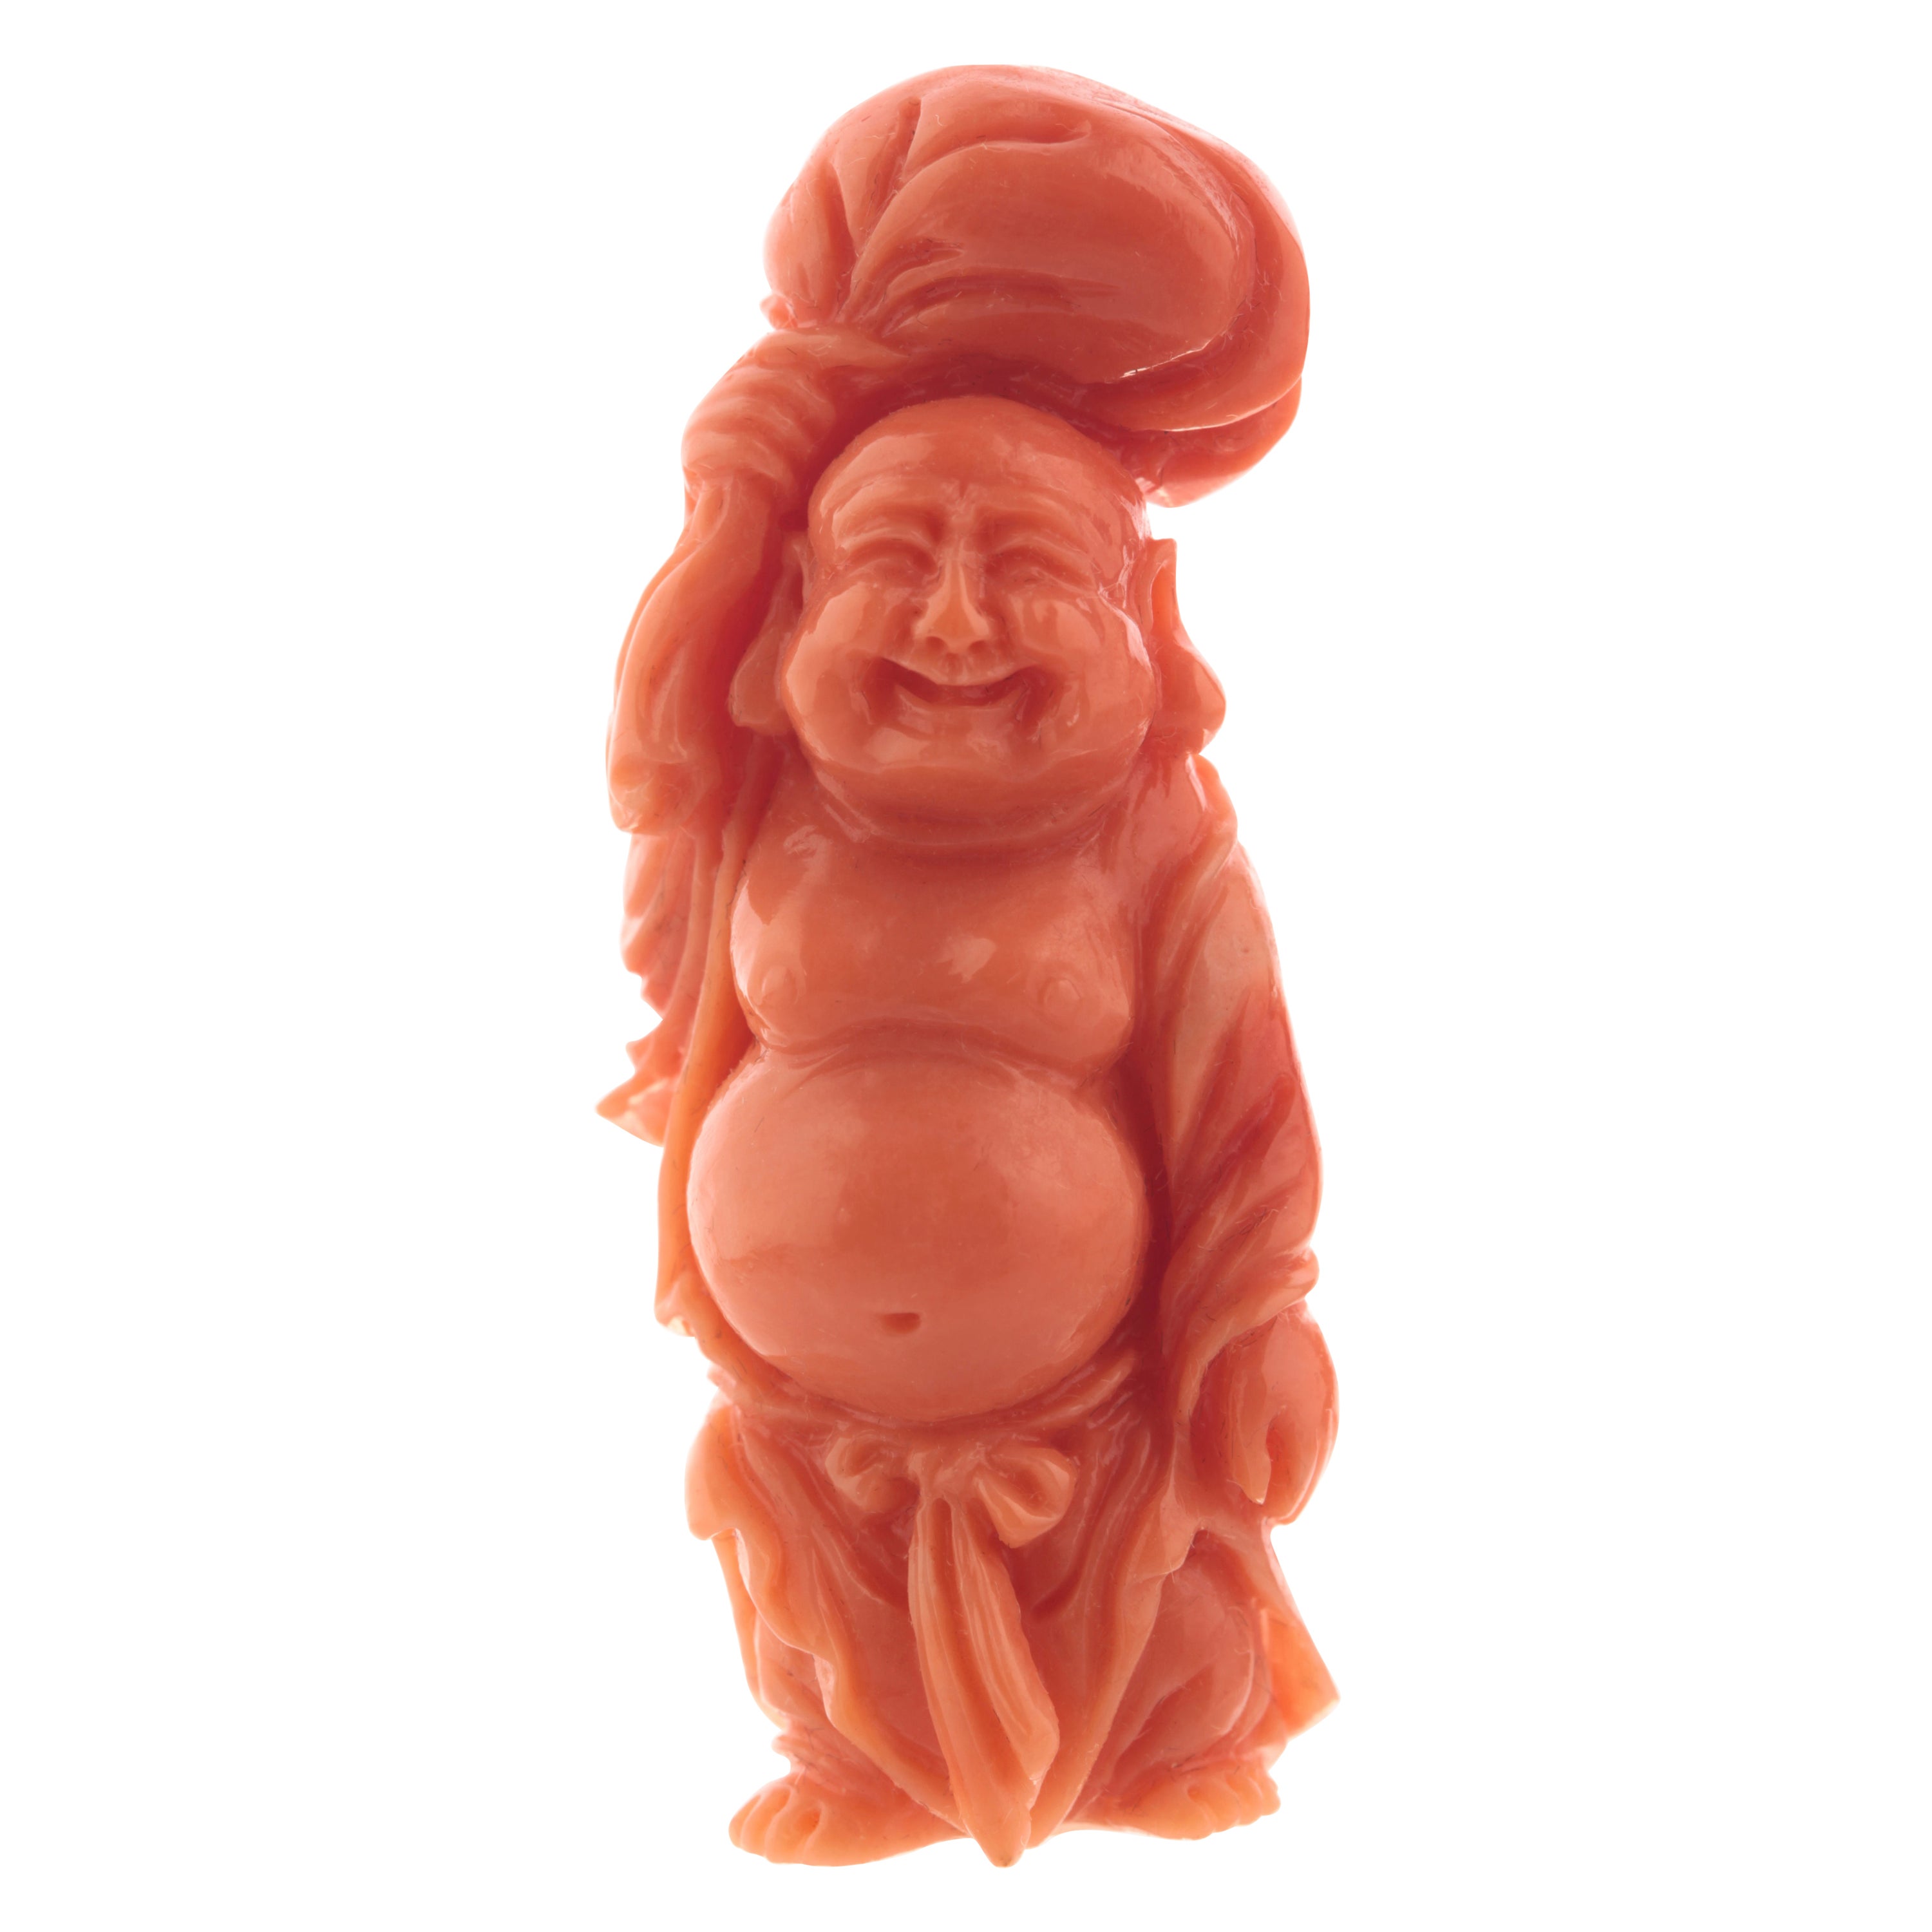 Laughing Buddha Carved Asian Decorative Art Statue Sculpture Natural Red Coral For Sale